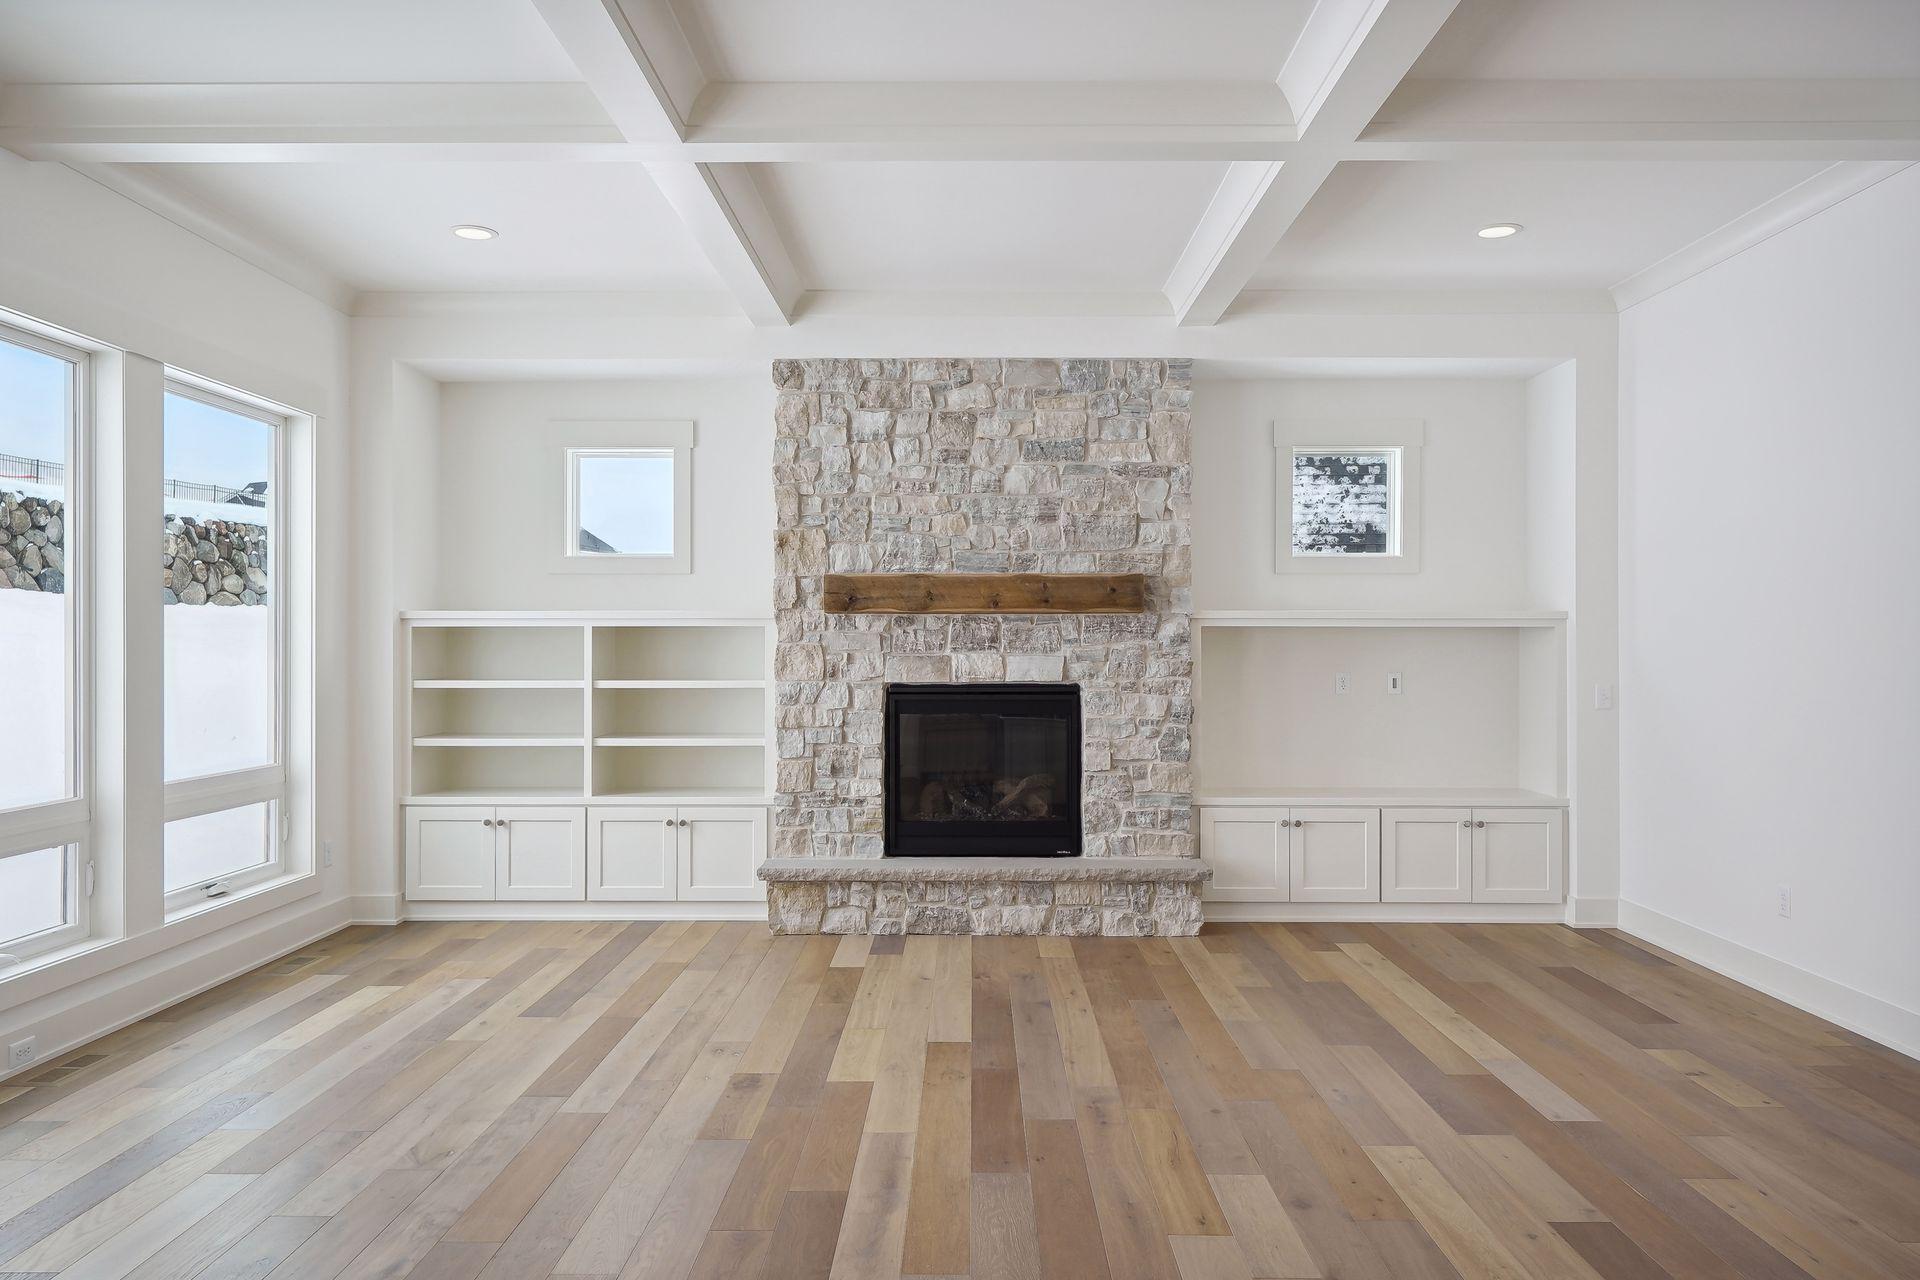 Main floor fireplace with stacked stone to ceiling, built-ins